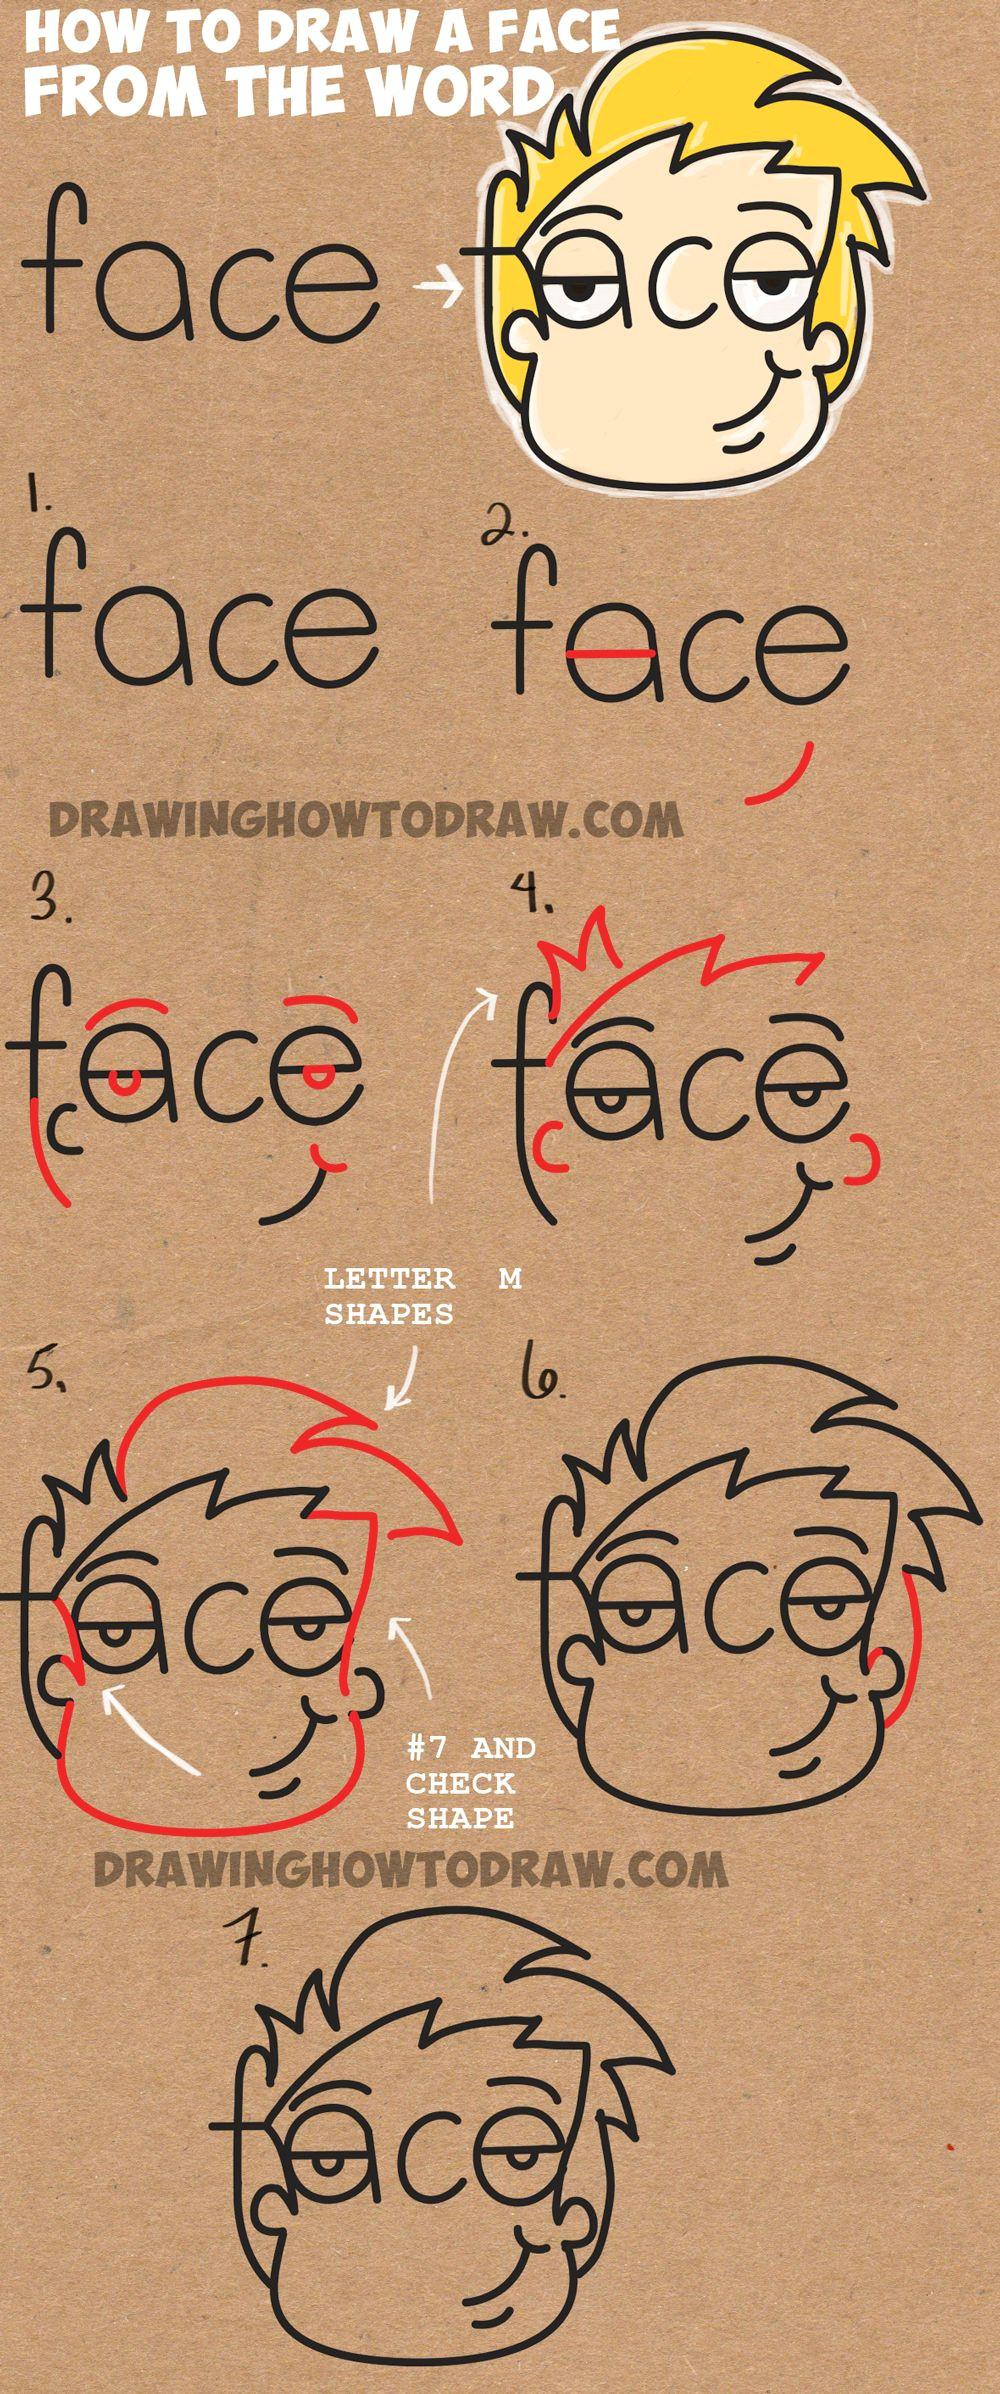 Drawing Cartoons with Numbers How to Draw Cartoon Faces From the Word Face Easy Step by Step